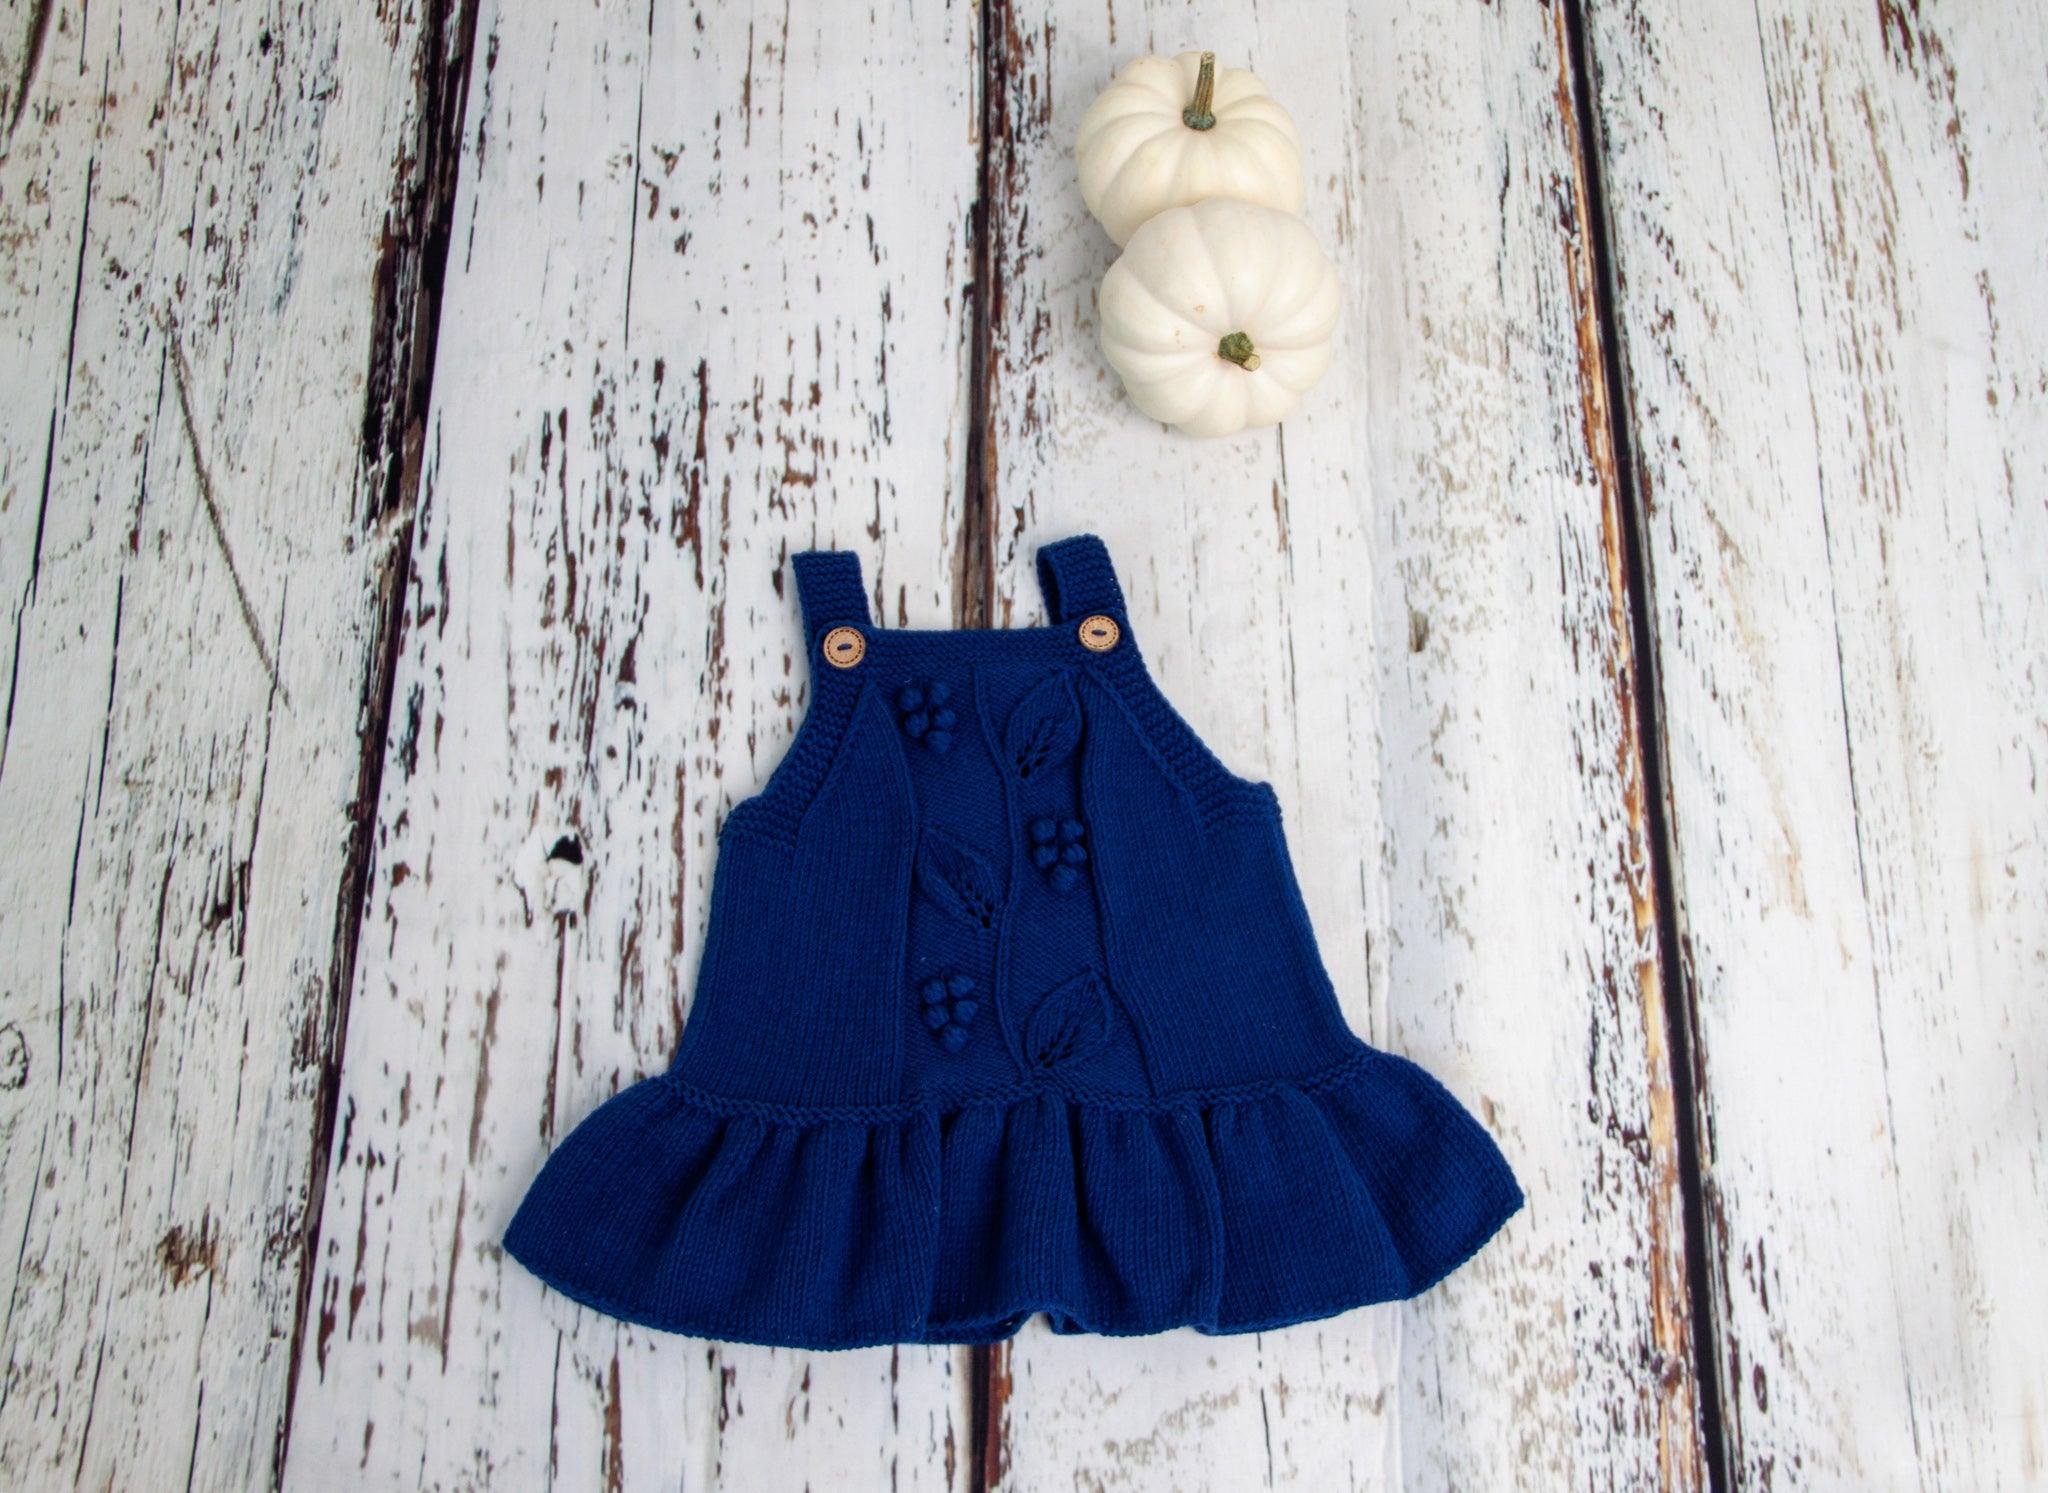 Hand Knitted Baby Dress - TilianKids